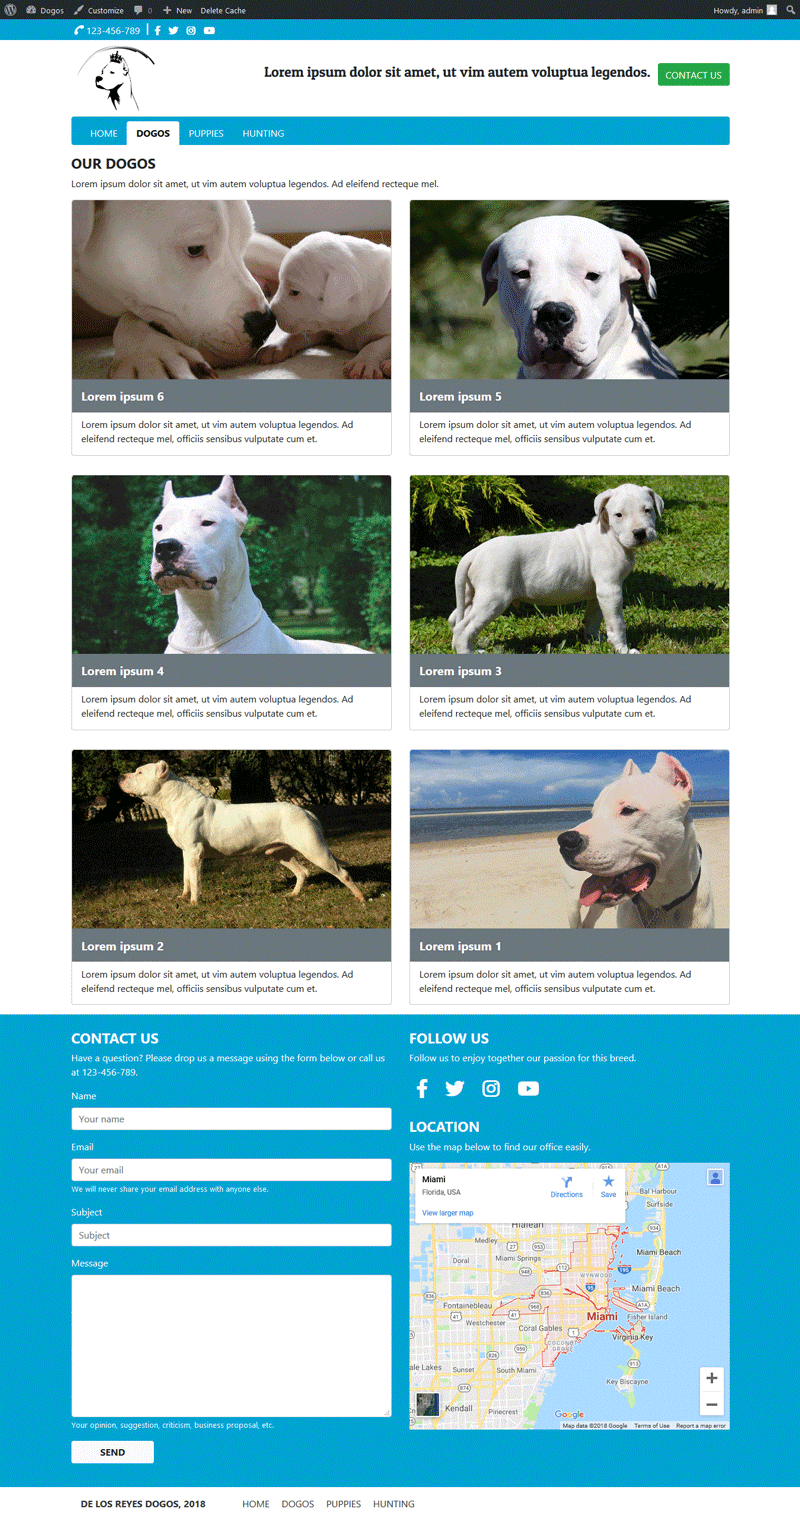 Website "De Los Reyes Dogos": Page "Archive" viewed on large-screen devices.